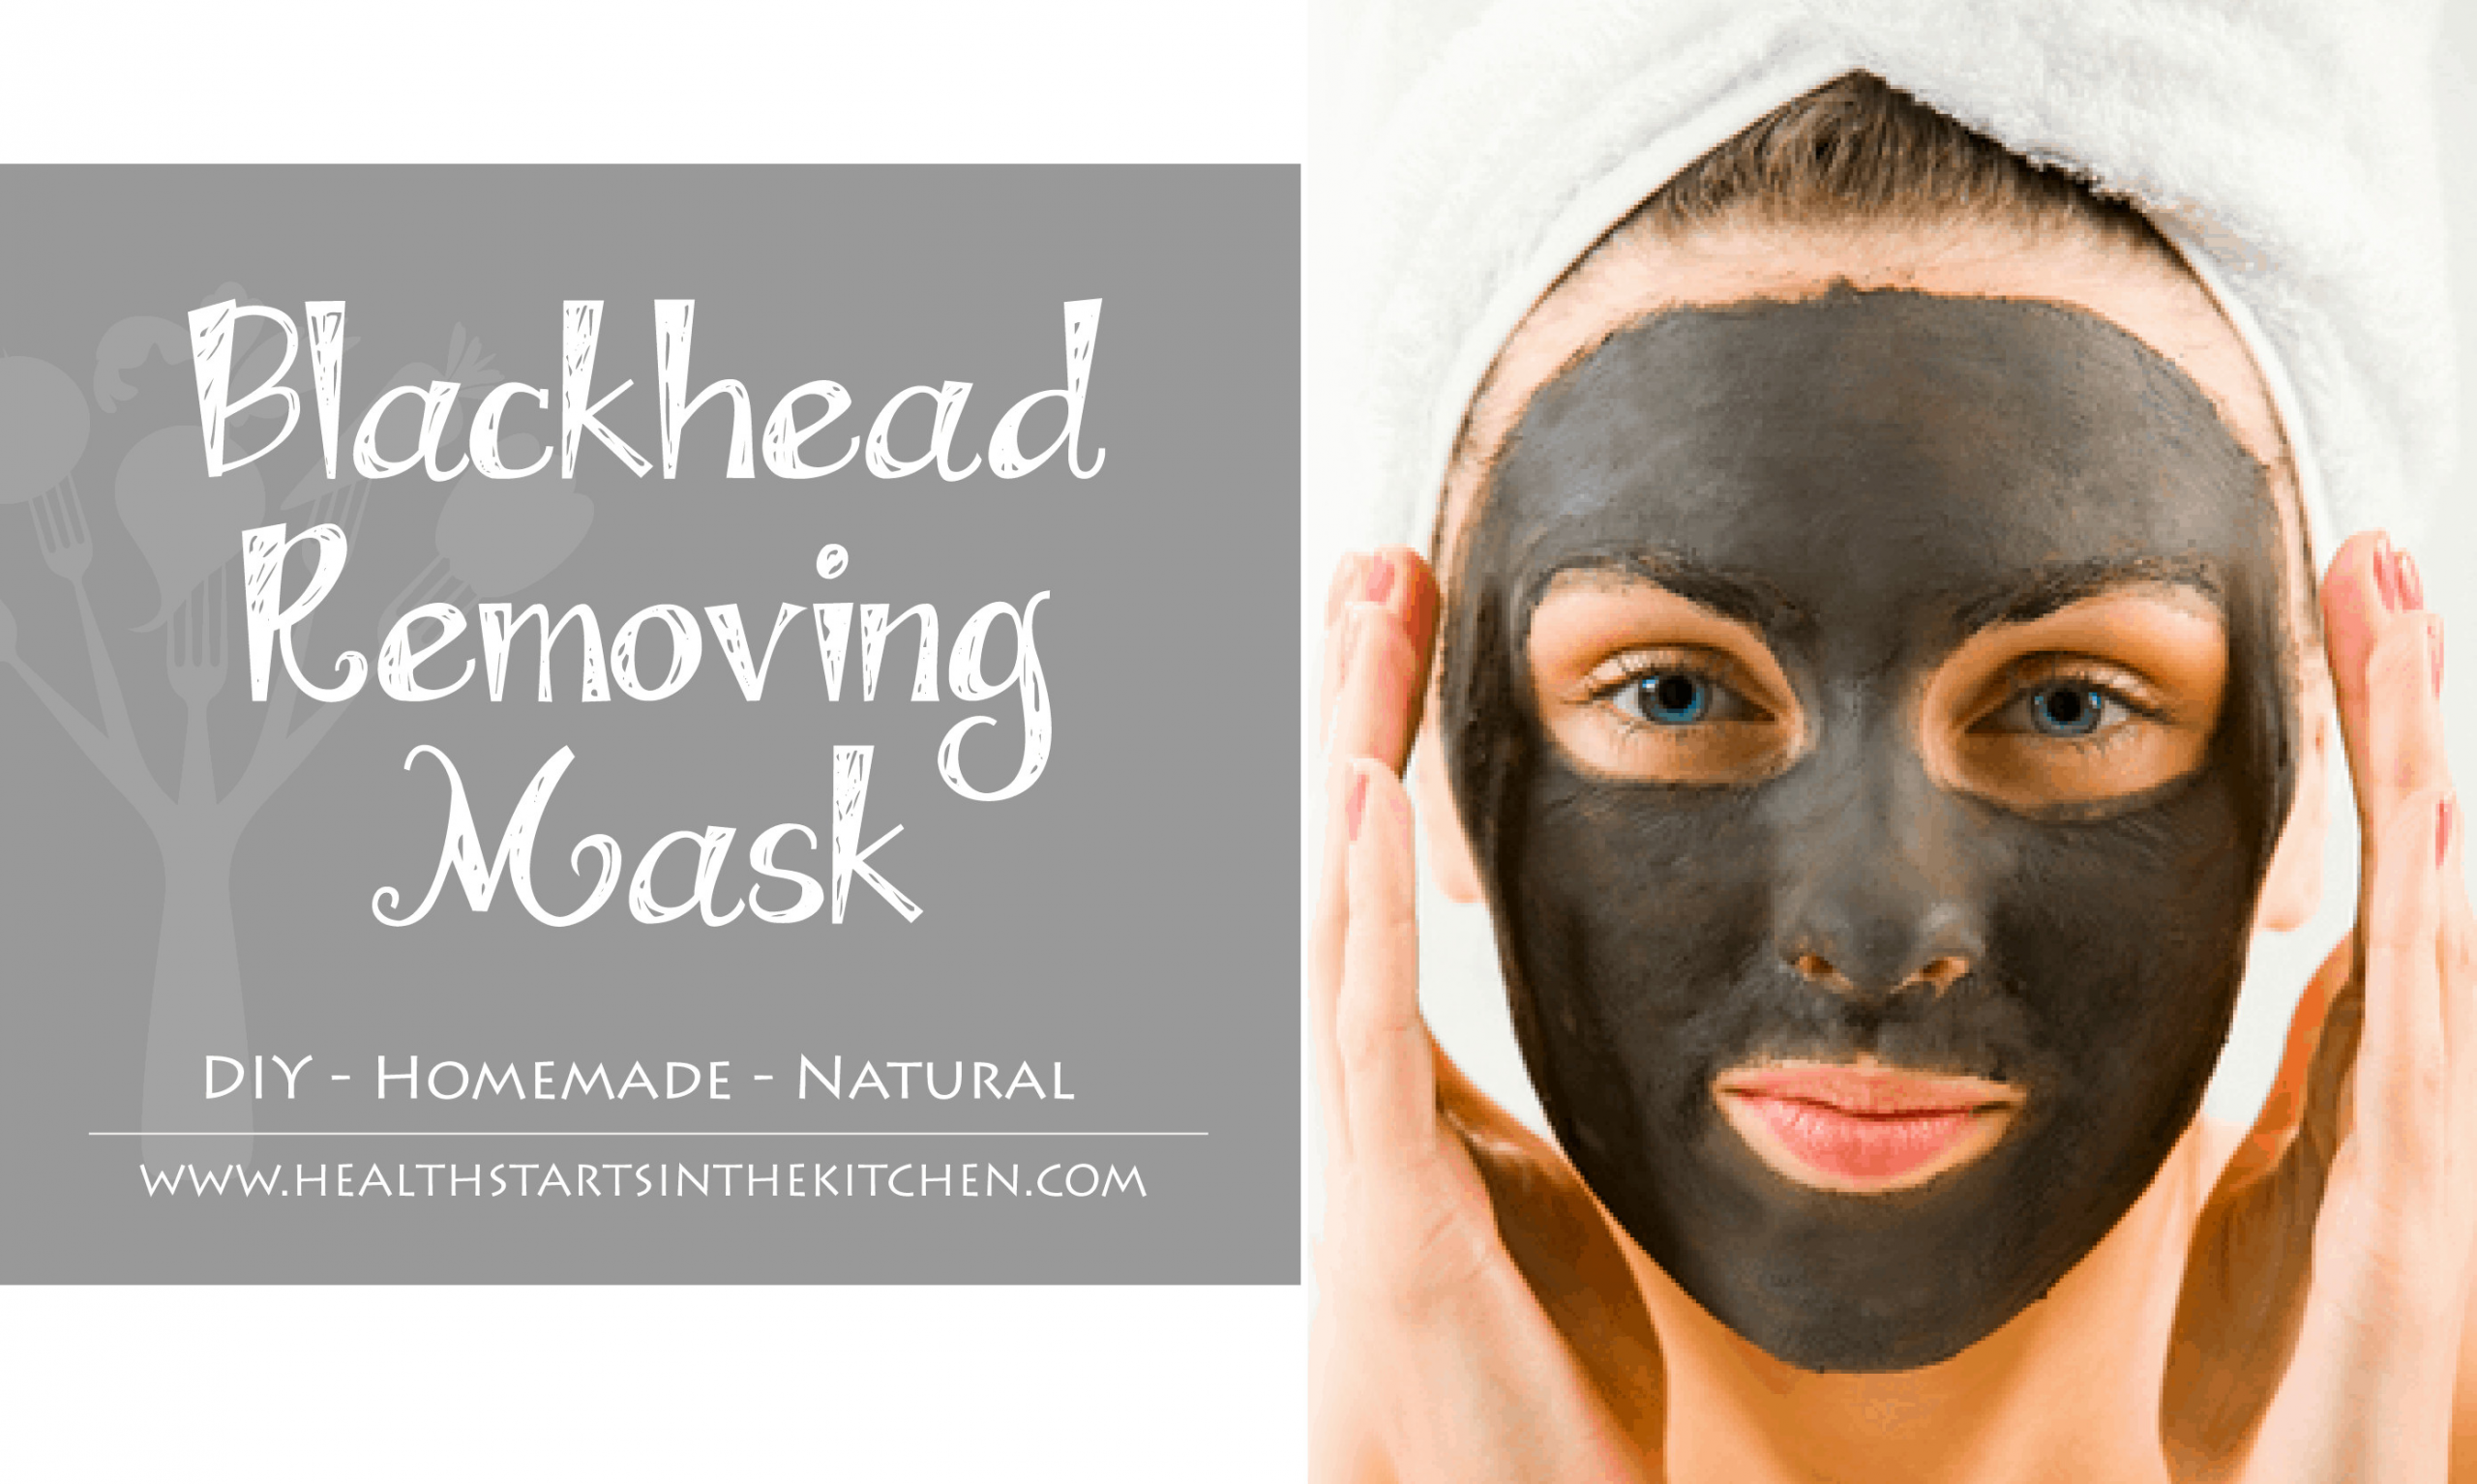 DIY Face Mask To Remove Blackheads<br />
 DIY Homemade Blackhead Removing Mask Health Starts in